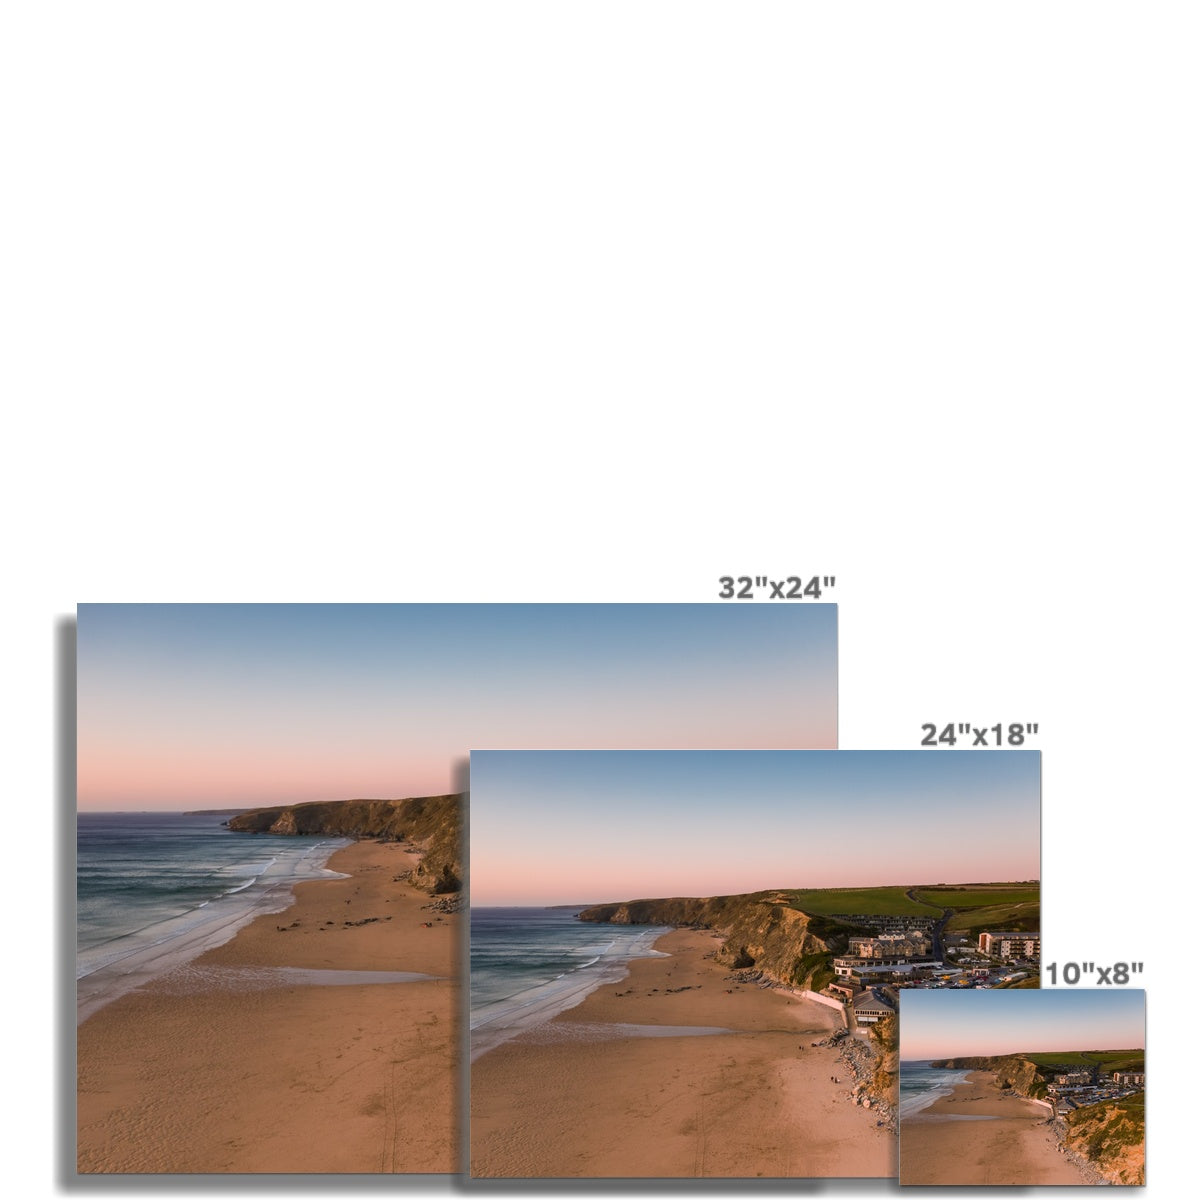 watergate bay picture sizes